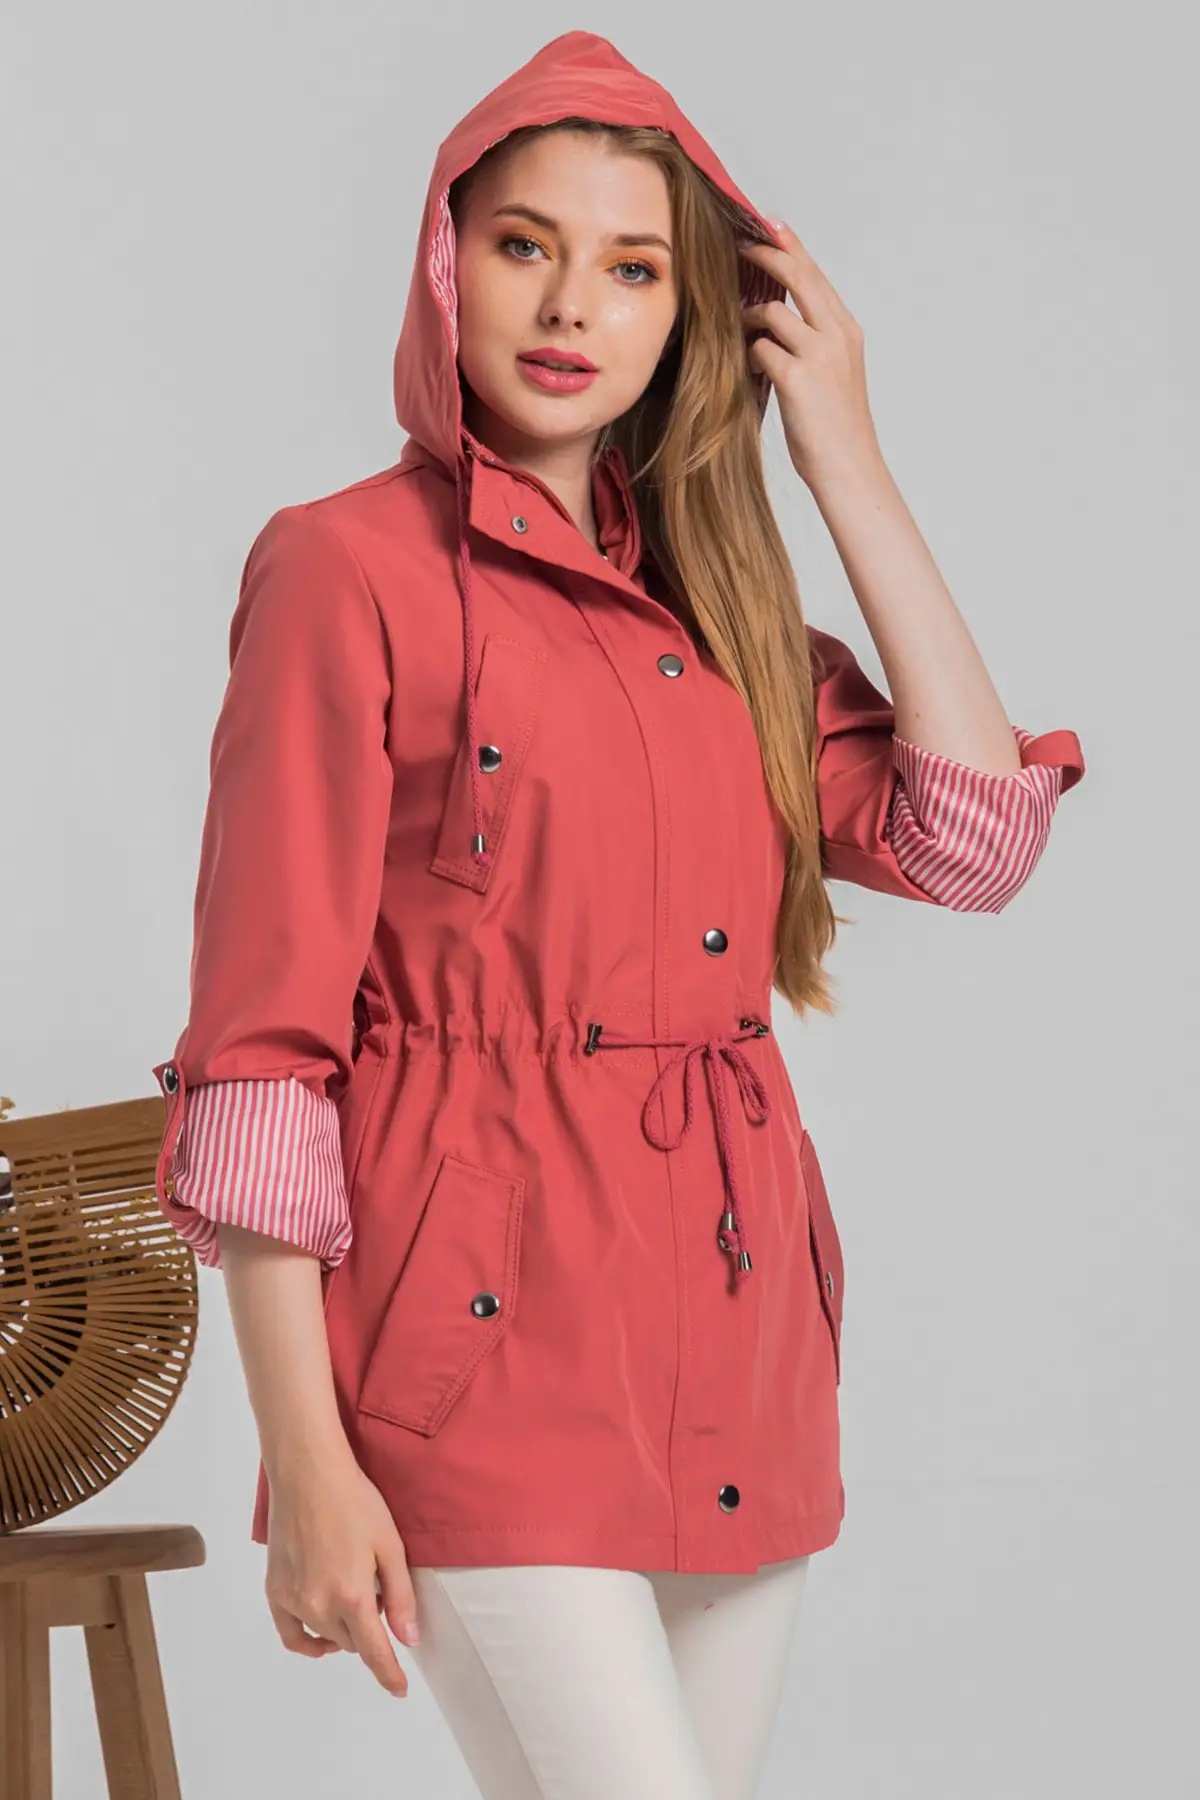 Women's Coral Short Waist Lace-up Hooded Lined Water Repellent Ultra Light Trench Coat Autumn Clothing Cotton Casual Jacket